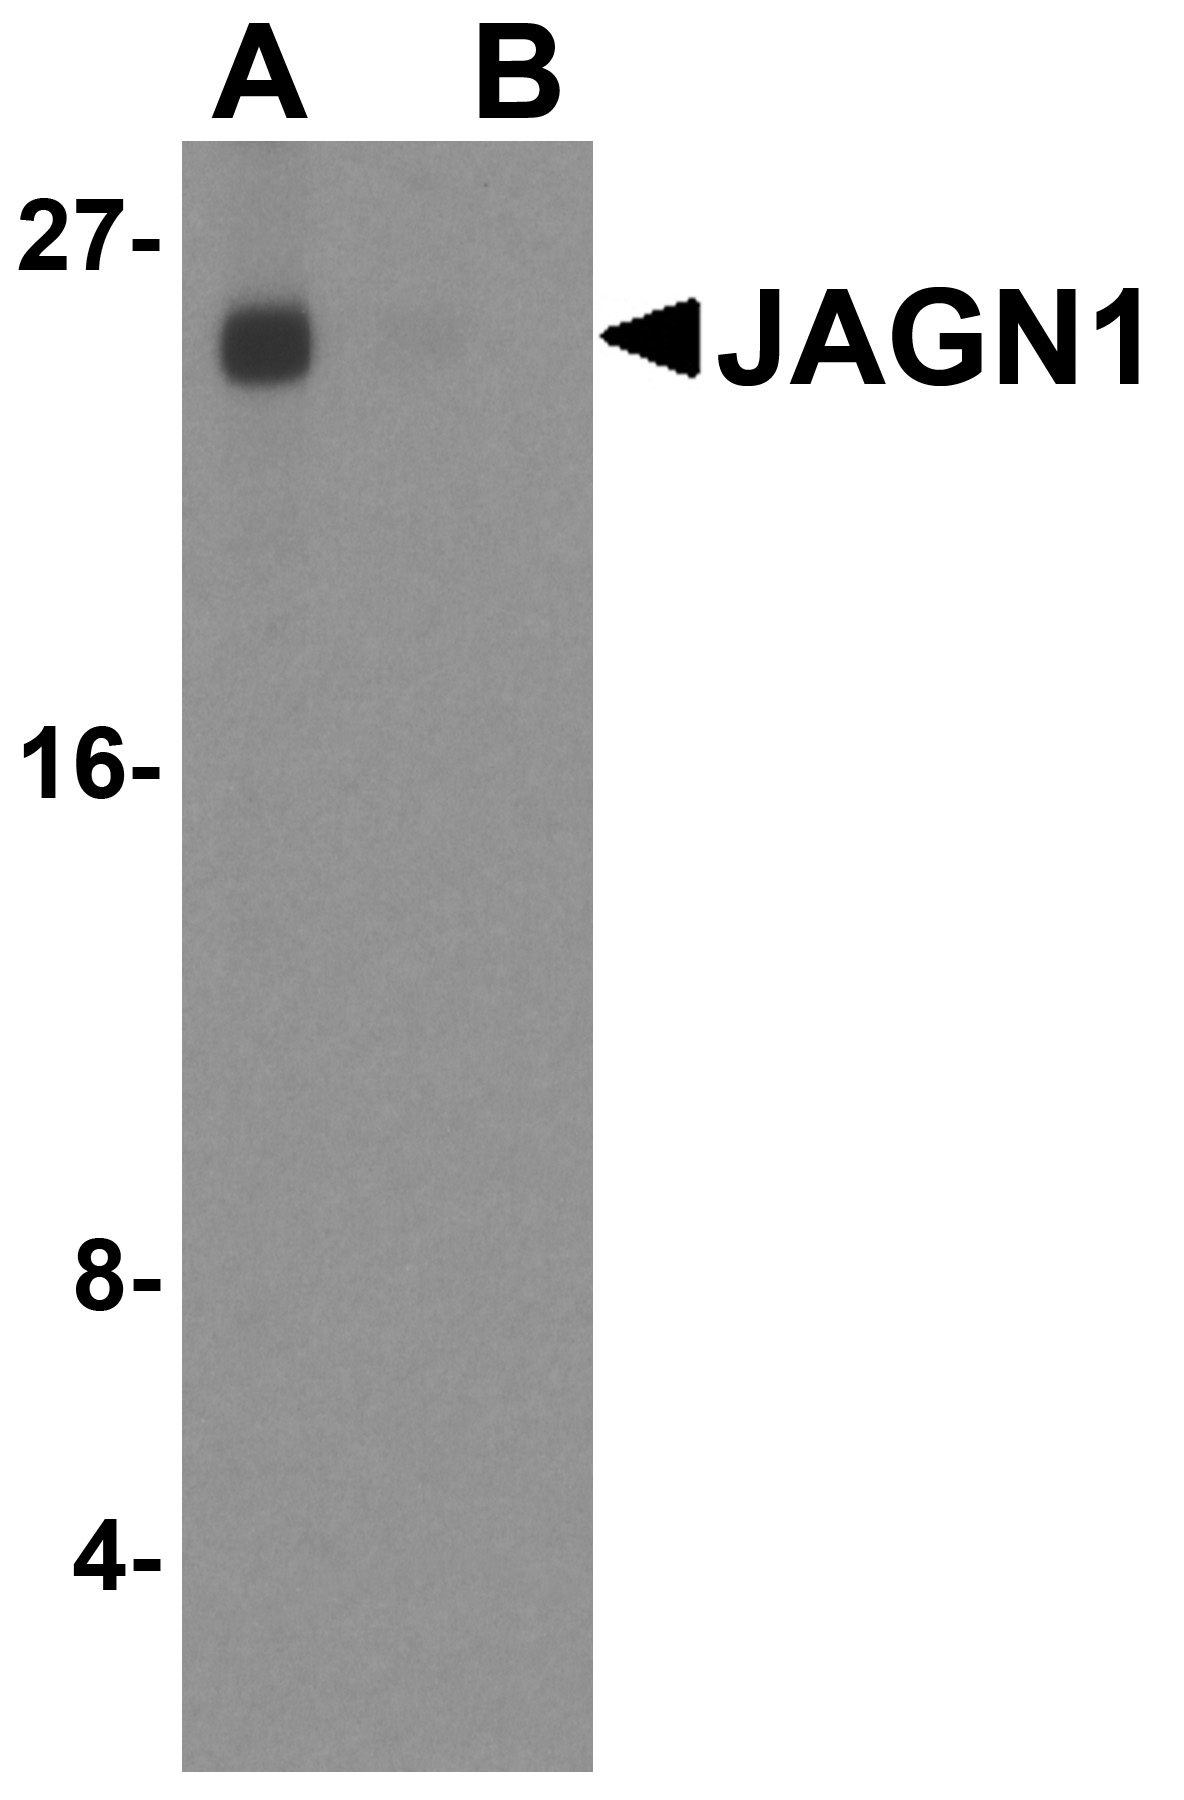 Western blot analysis of JAGN1 in MCF7 cell lysate with JAGN1 antibody at 1ug/ml in (A) the absence and (B) the presence of blocking peptide.